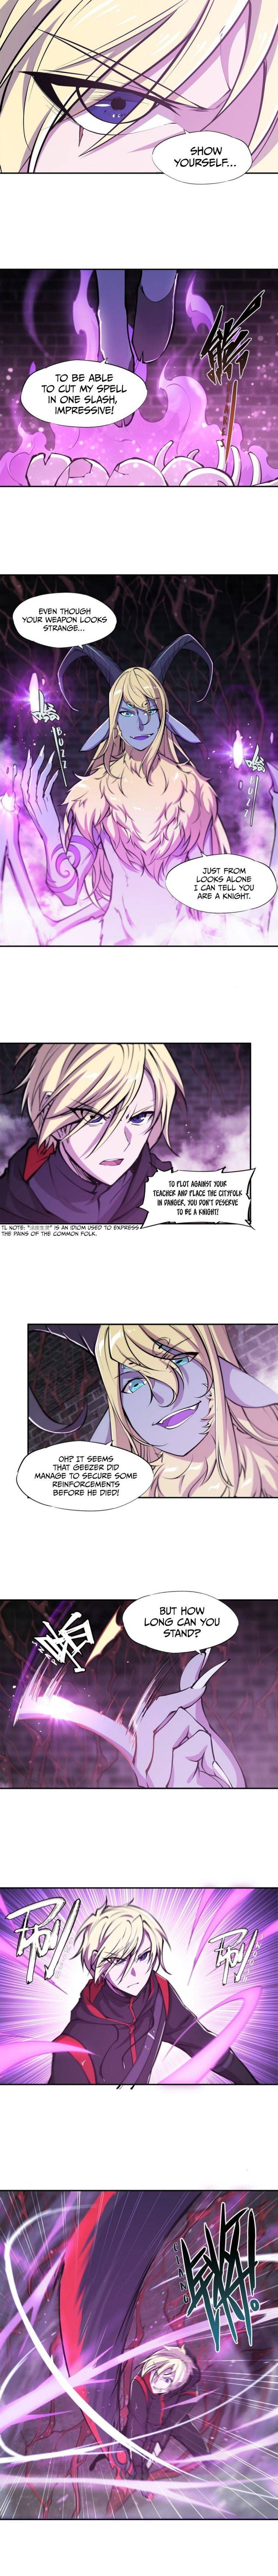 The Blood Princess and the Knight Chapter 90 page 4